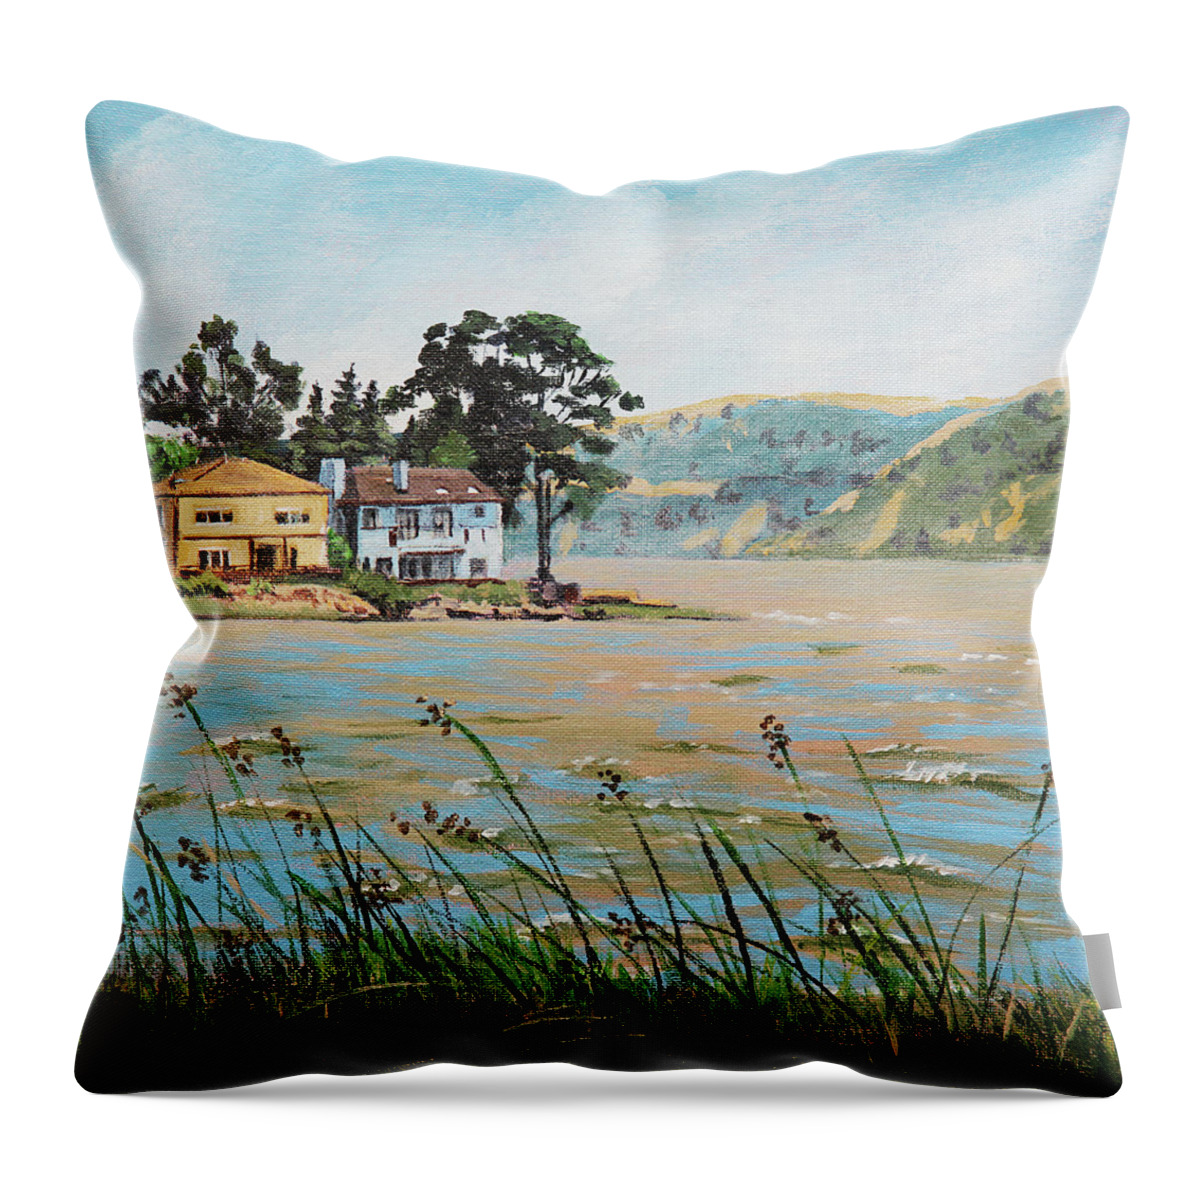 Buildings Throw Pillow featuring the painting Bay Scenery with Houses by Masha Batkova